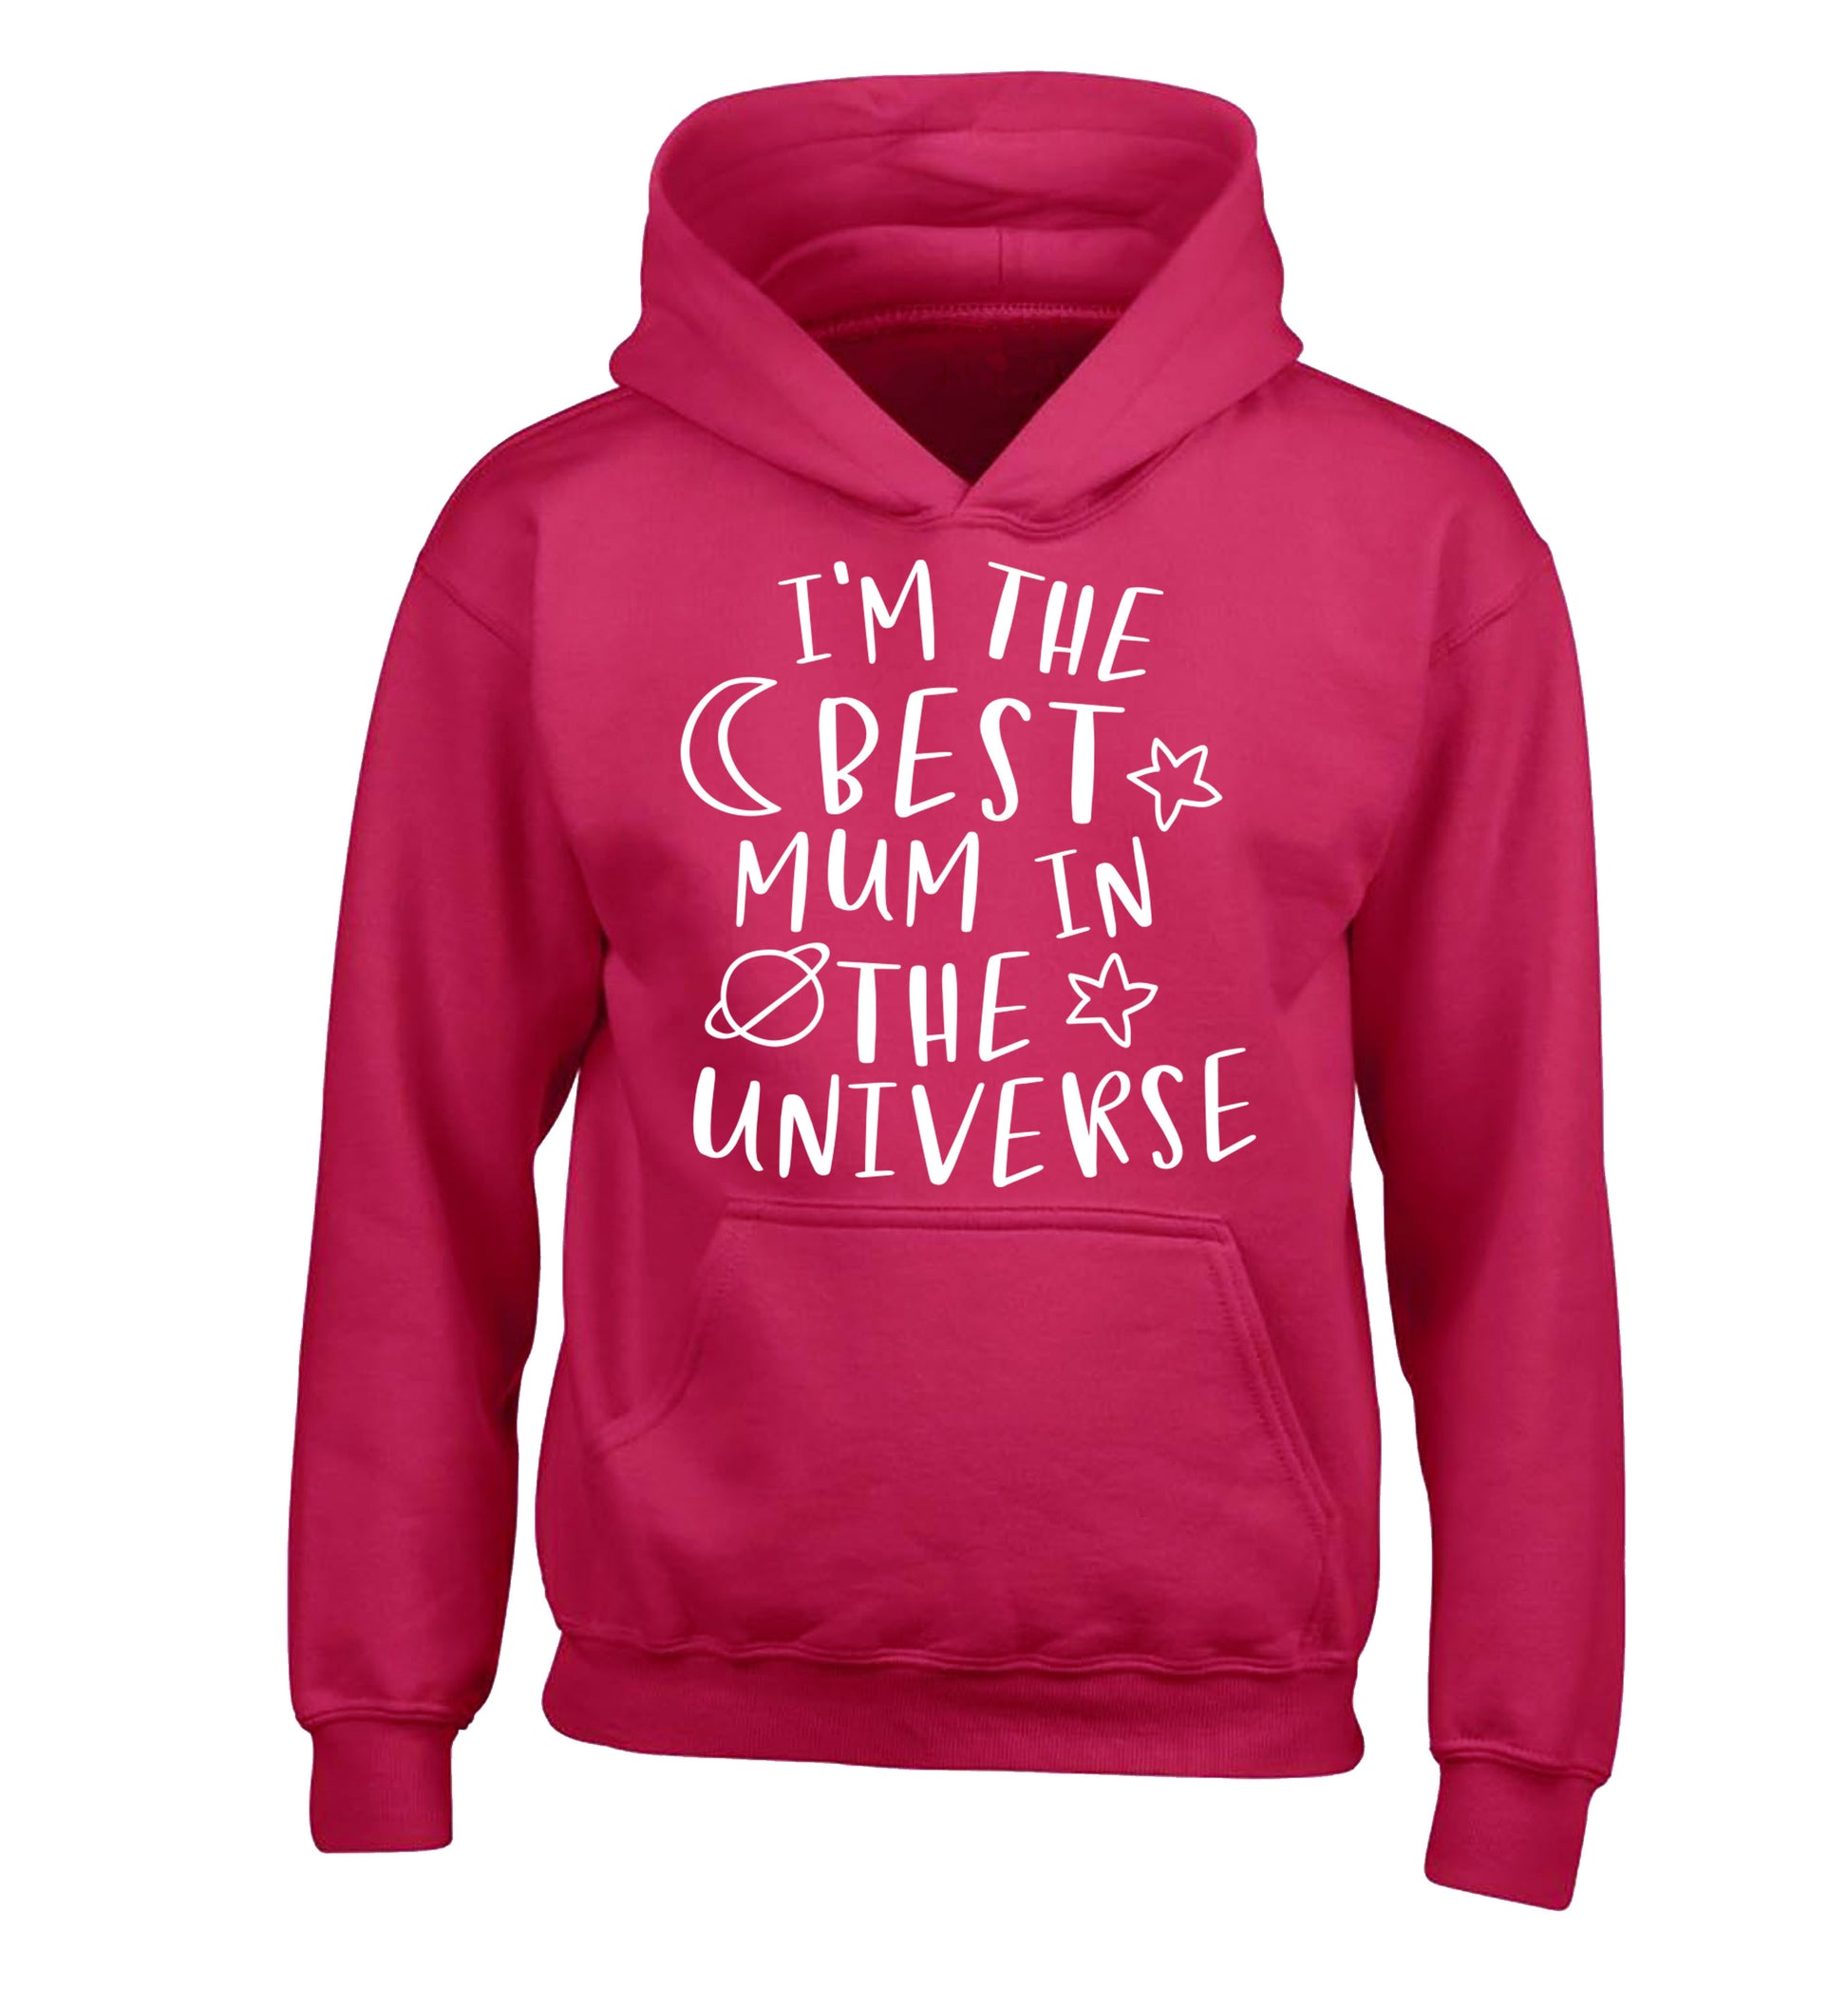 I'm the best mum in the universe children's pink hoodie 12-13 Years